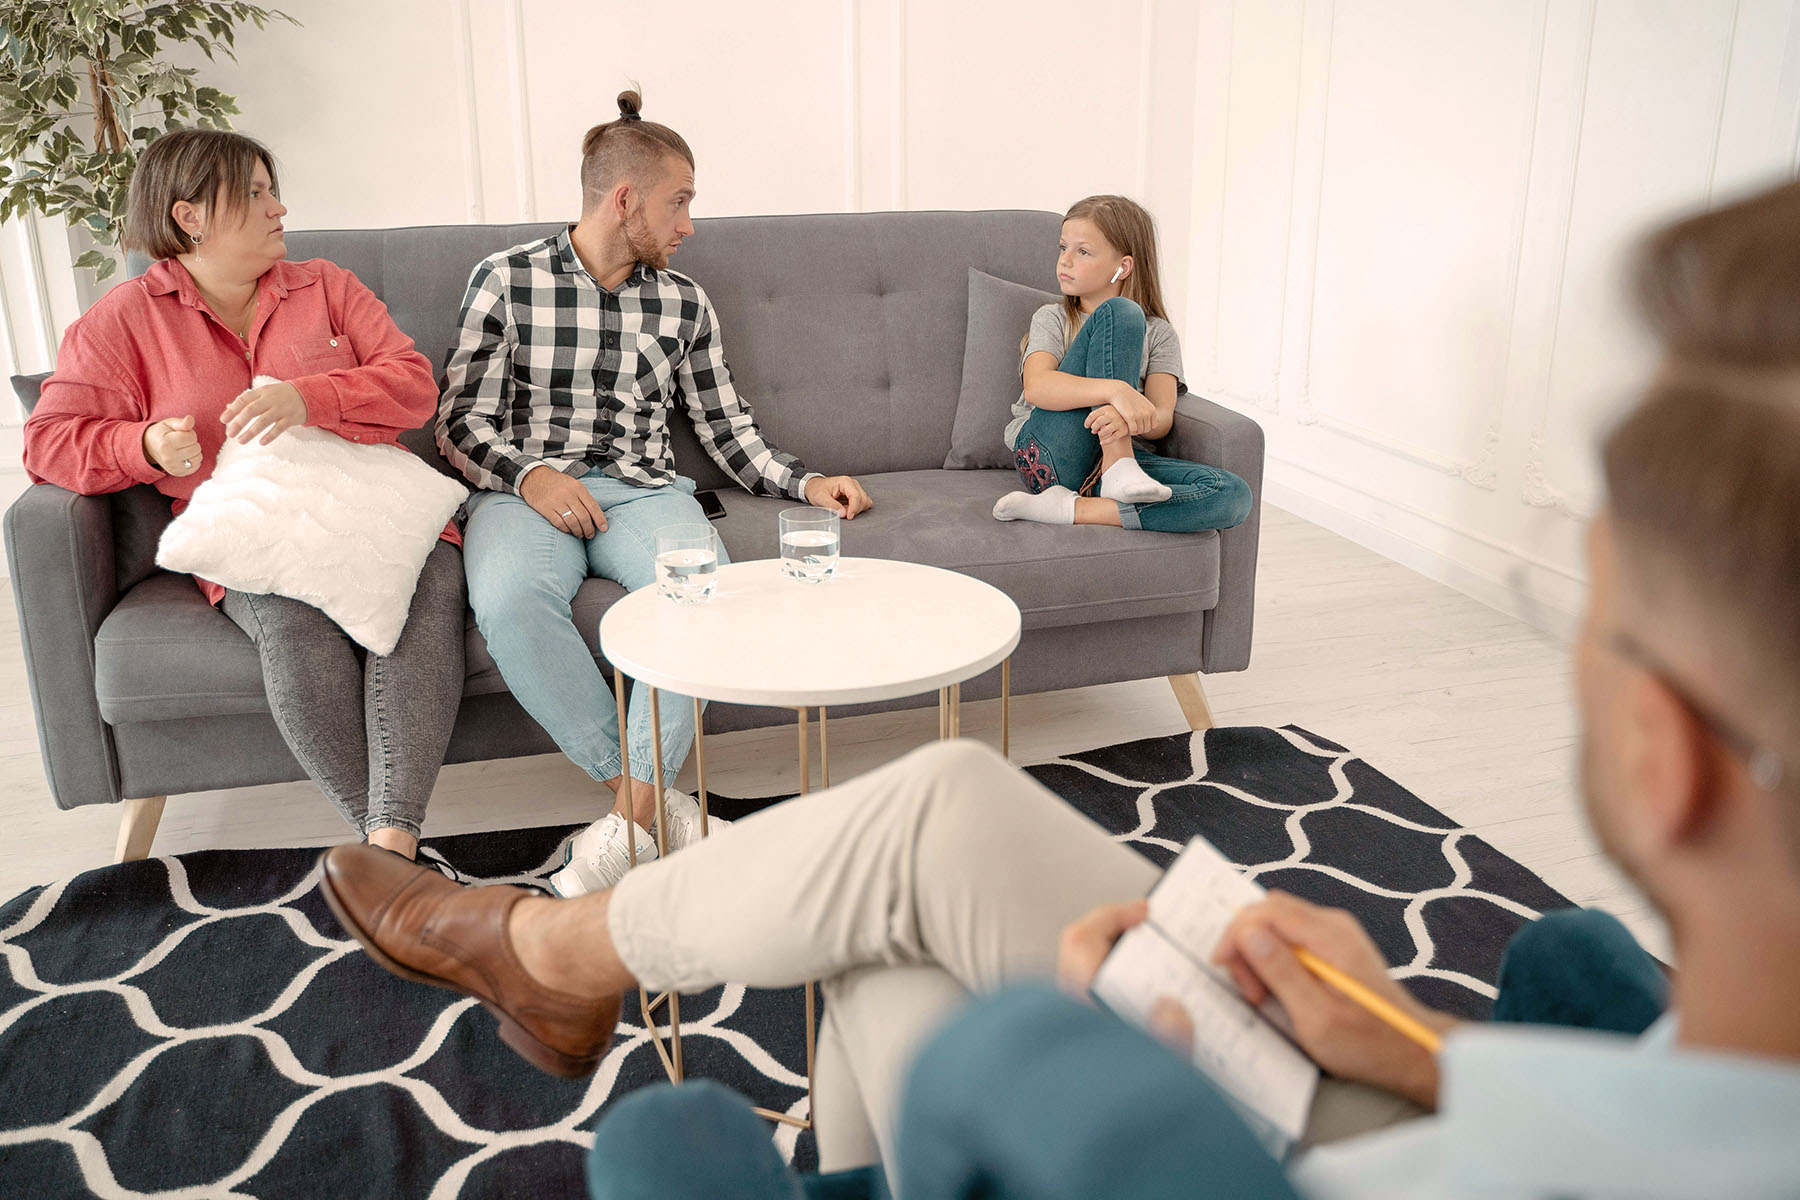 Mother, Father sitting next to each other with their daughter also on the couch but further away and all three are looking at each other as therapist sits across